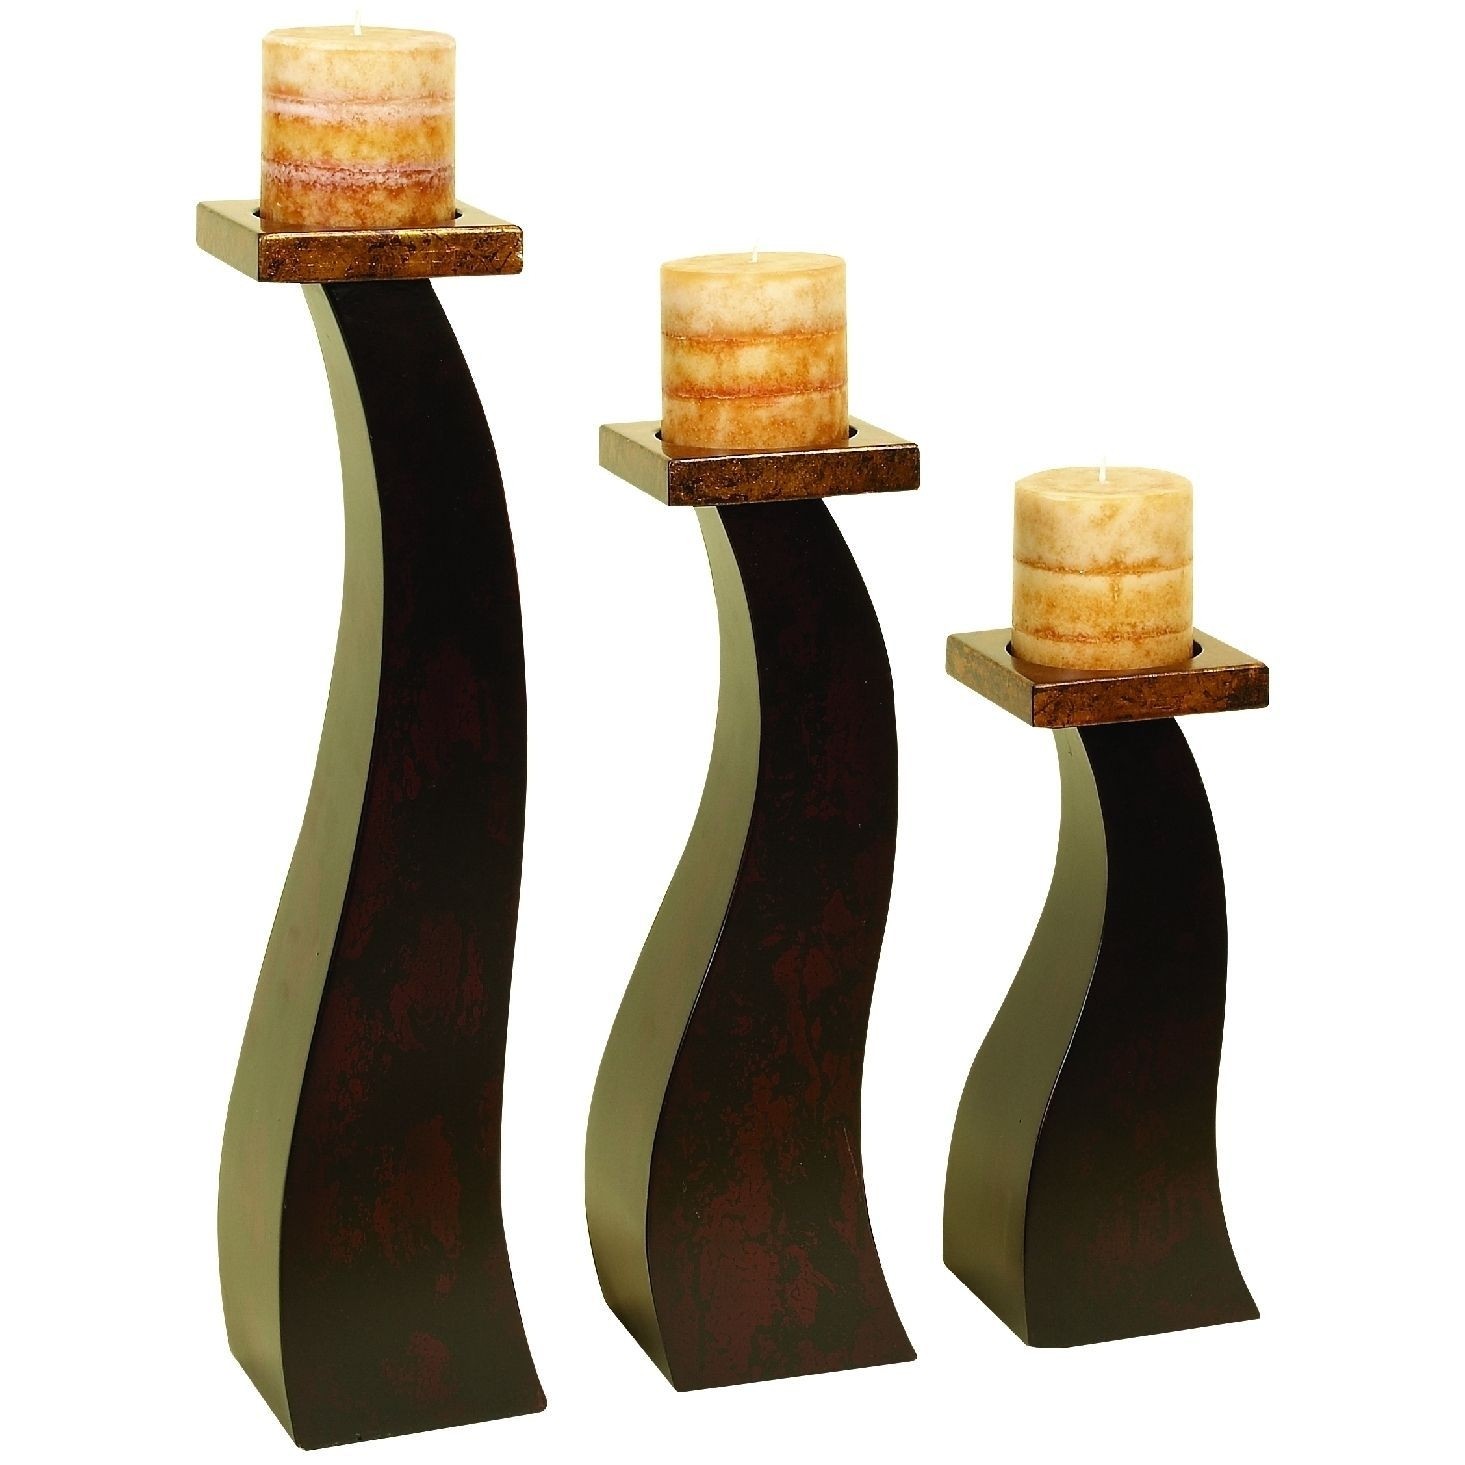 3-Pc Wooden Candle Holder Set in Antique Brown